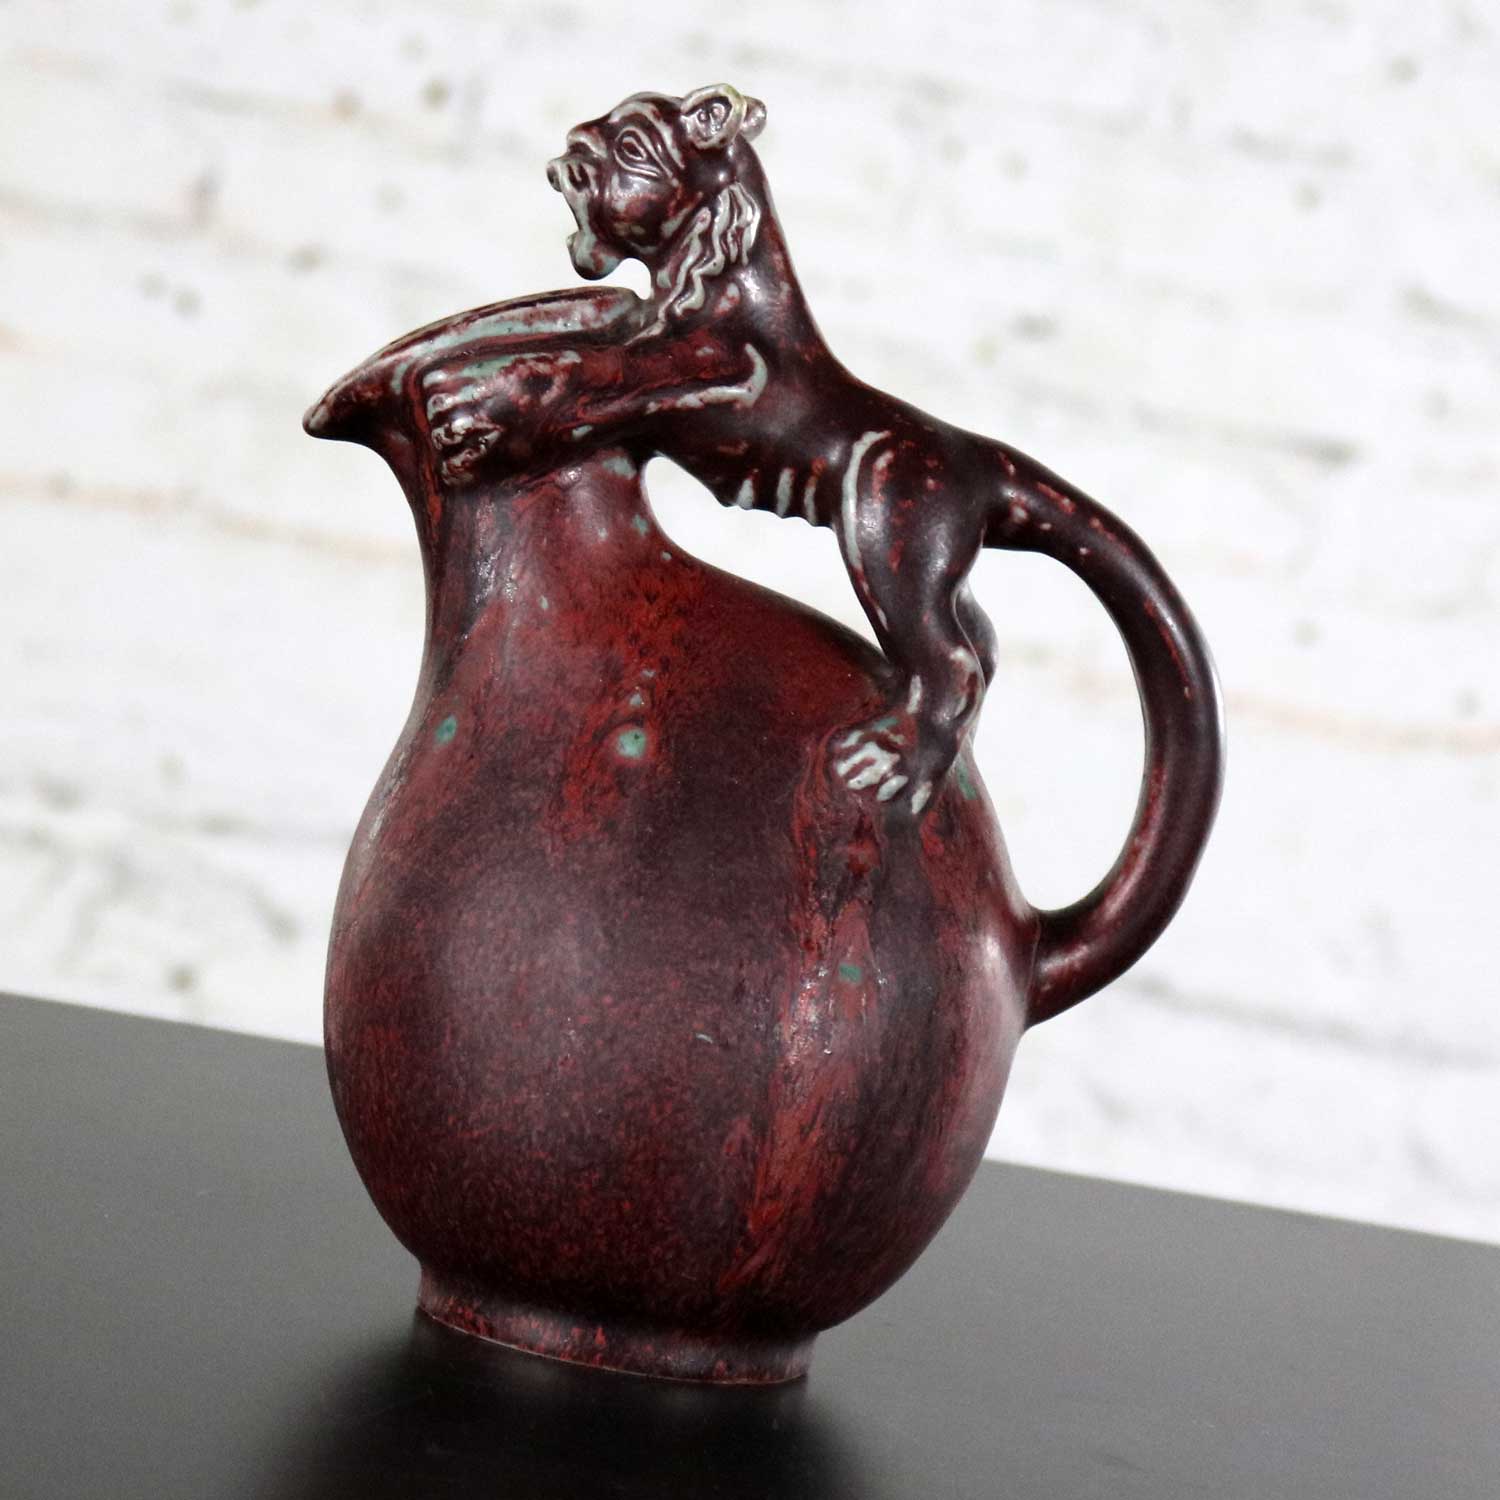 Stoneware Jug or Ewer with Lion Handle by Bode Willumsen for Royal Copenhagen